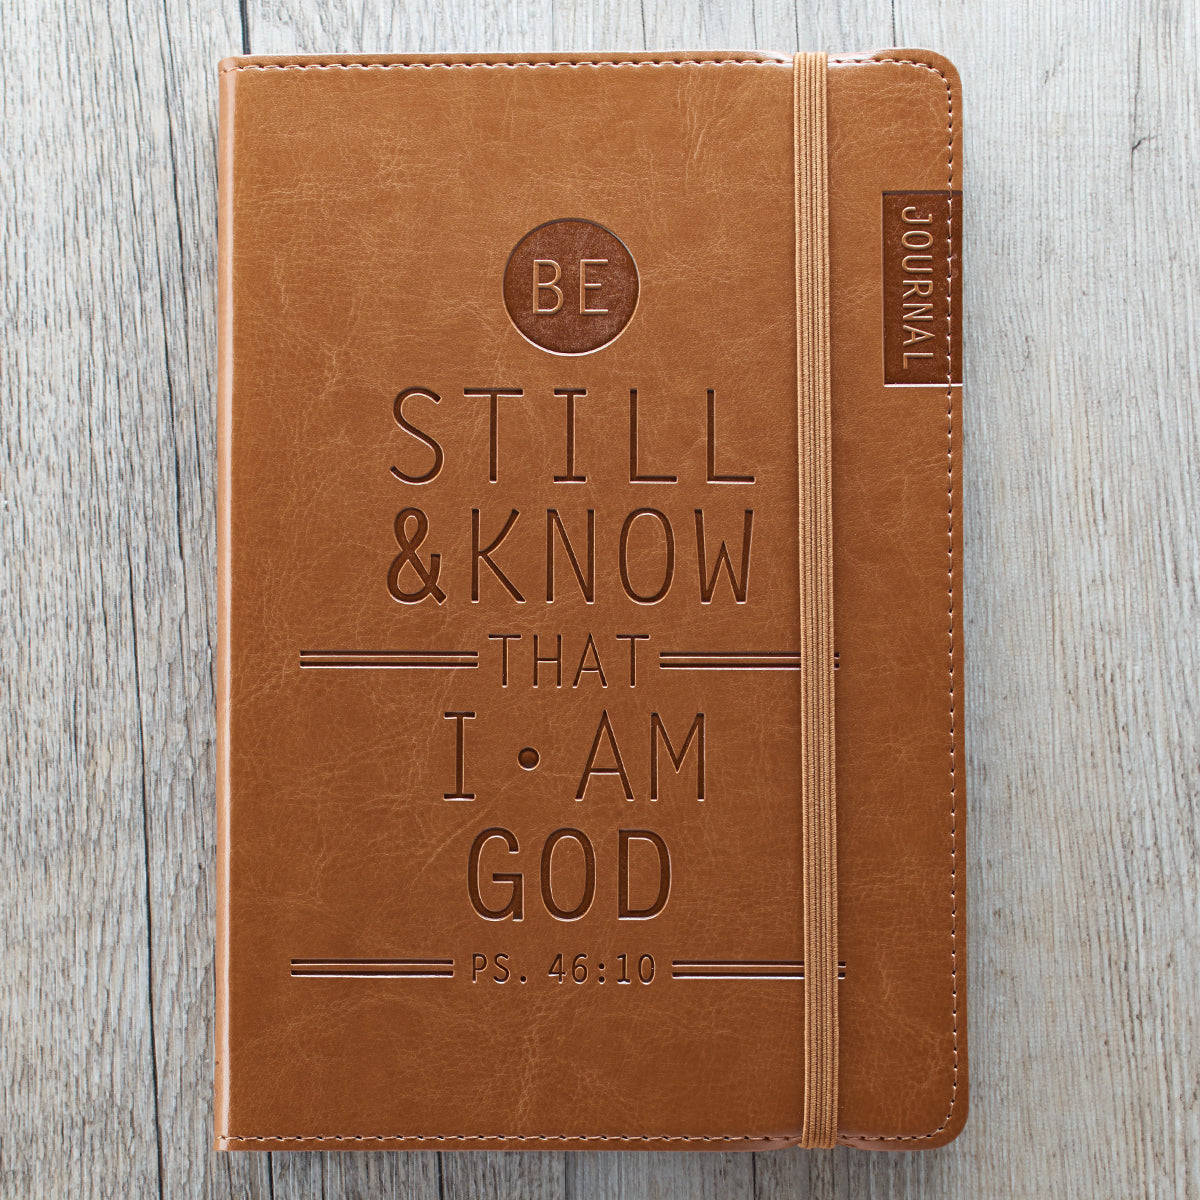 Be Still & Know Tan Flexcover Journal - Psalm 46:10 - The Christian Gift Company